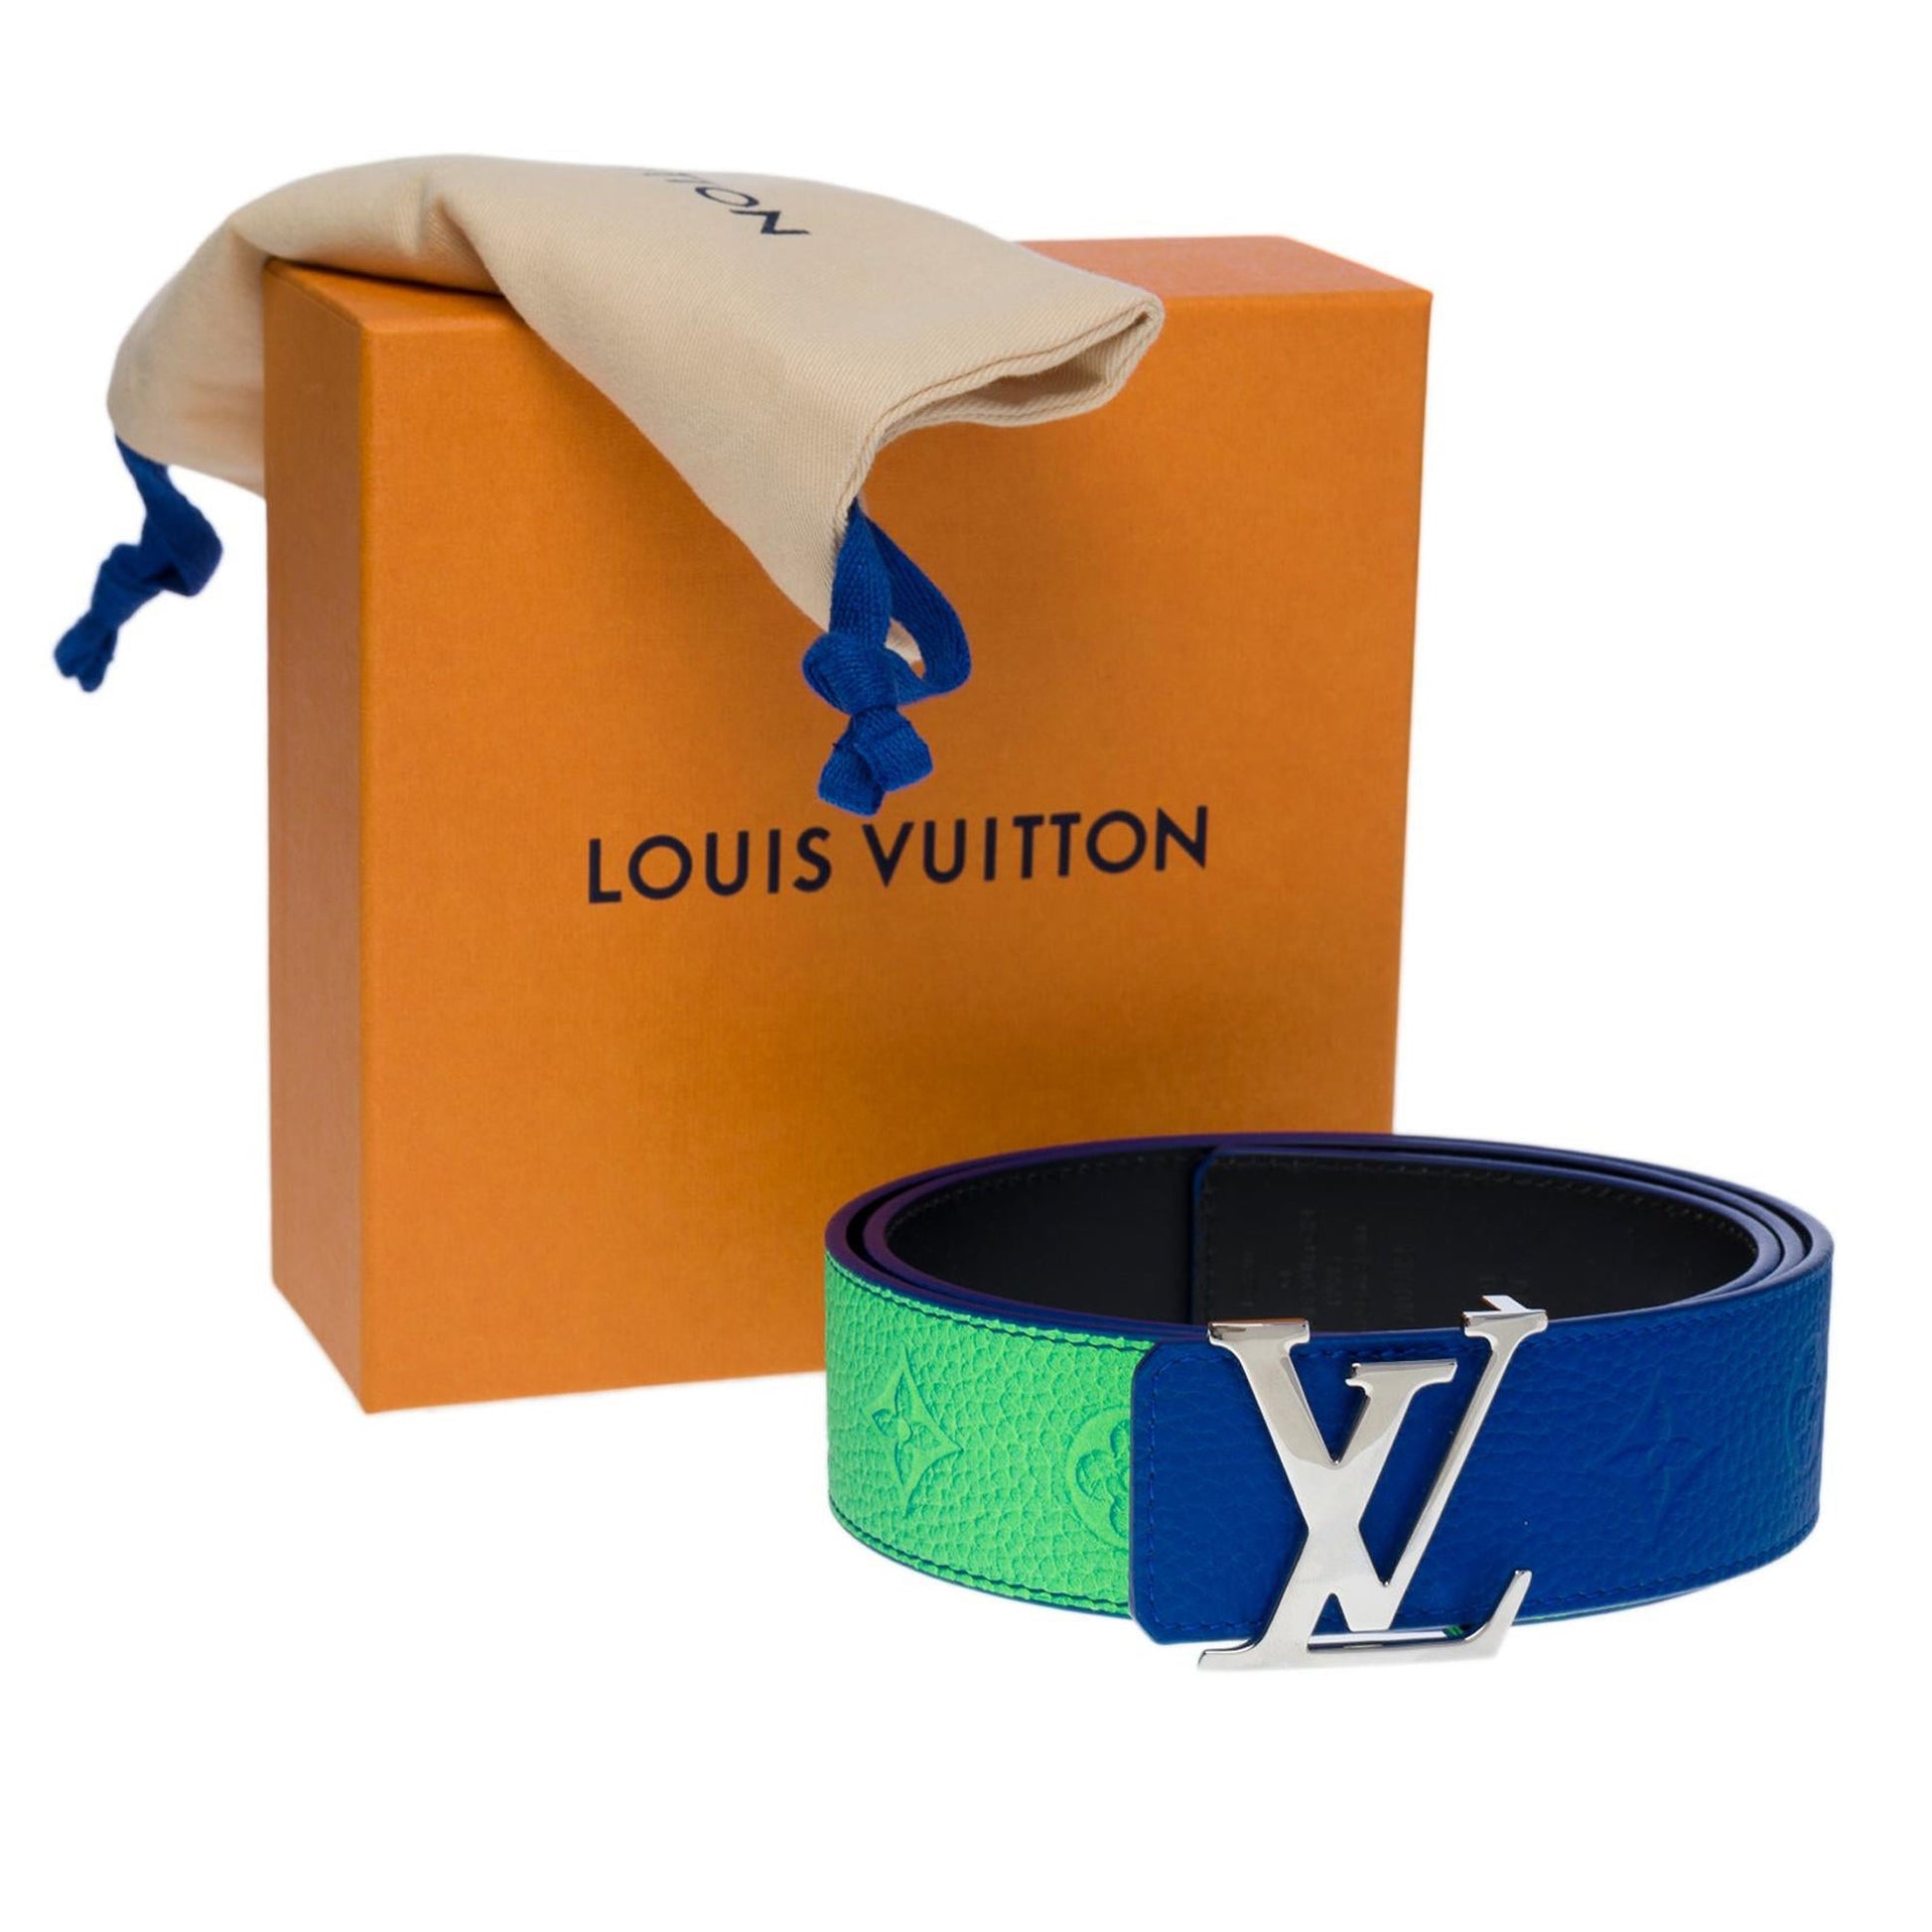 Louis Vuitton 40mm Embossed Taurillon White Leather Belt in Black